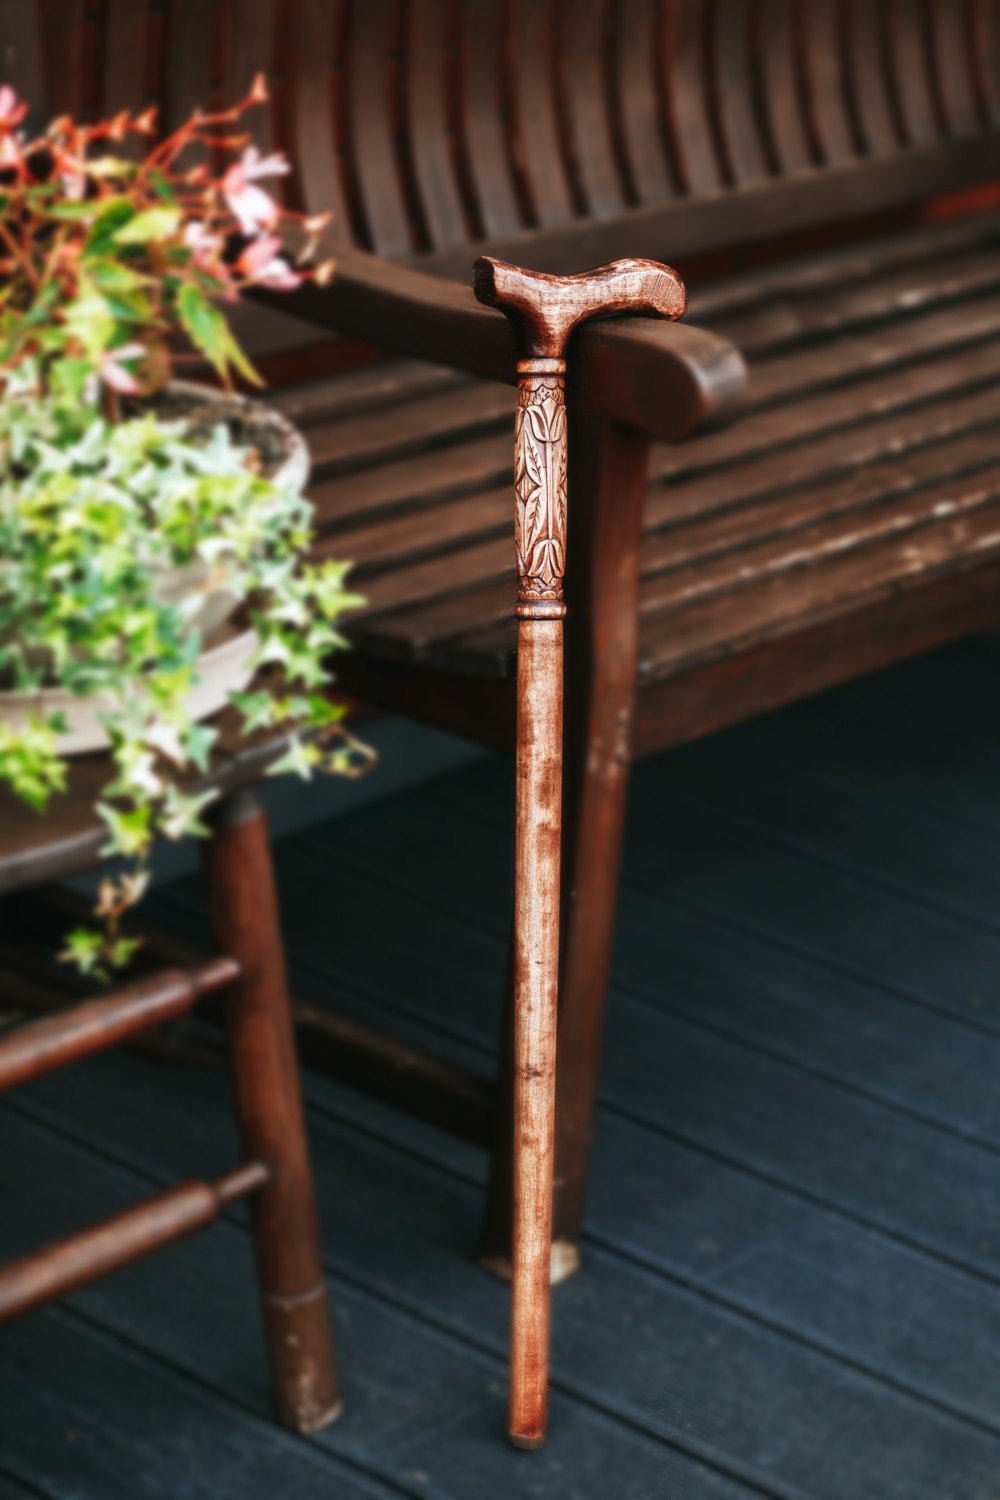 Hand-carved wooden cane.